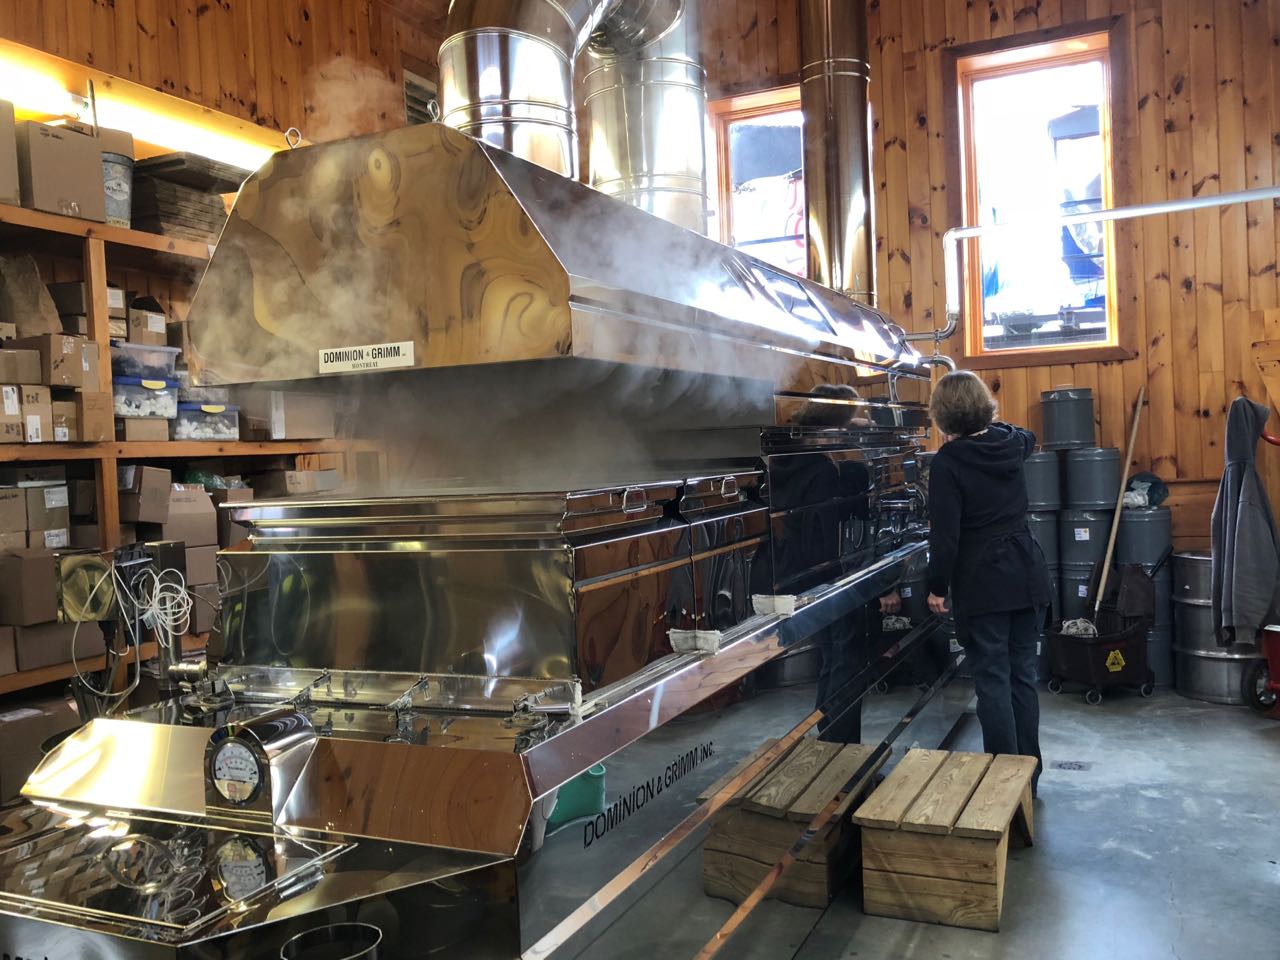 The product offerings and evaporator at Morning Star Maple. &nbsp;The steam from the sap literally streams directly out an opening in the roof!